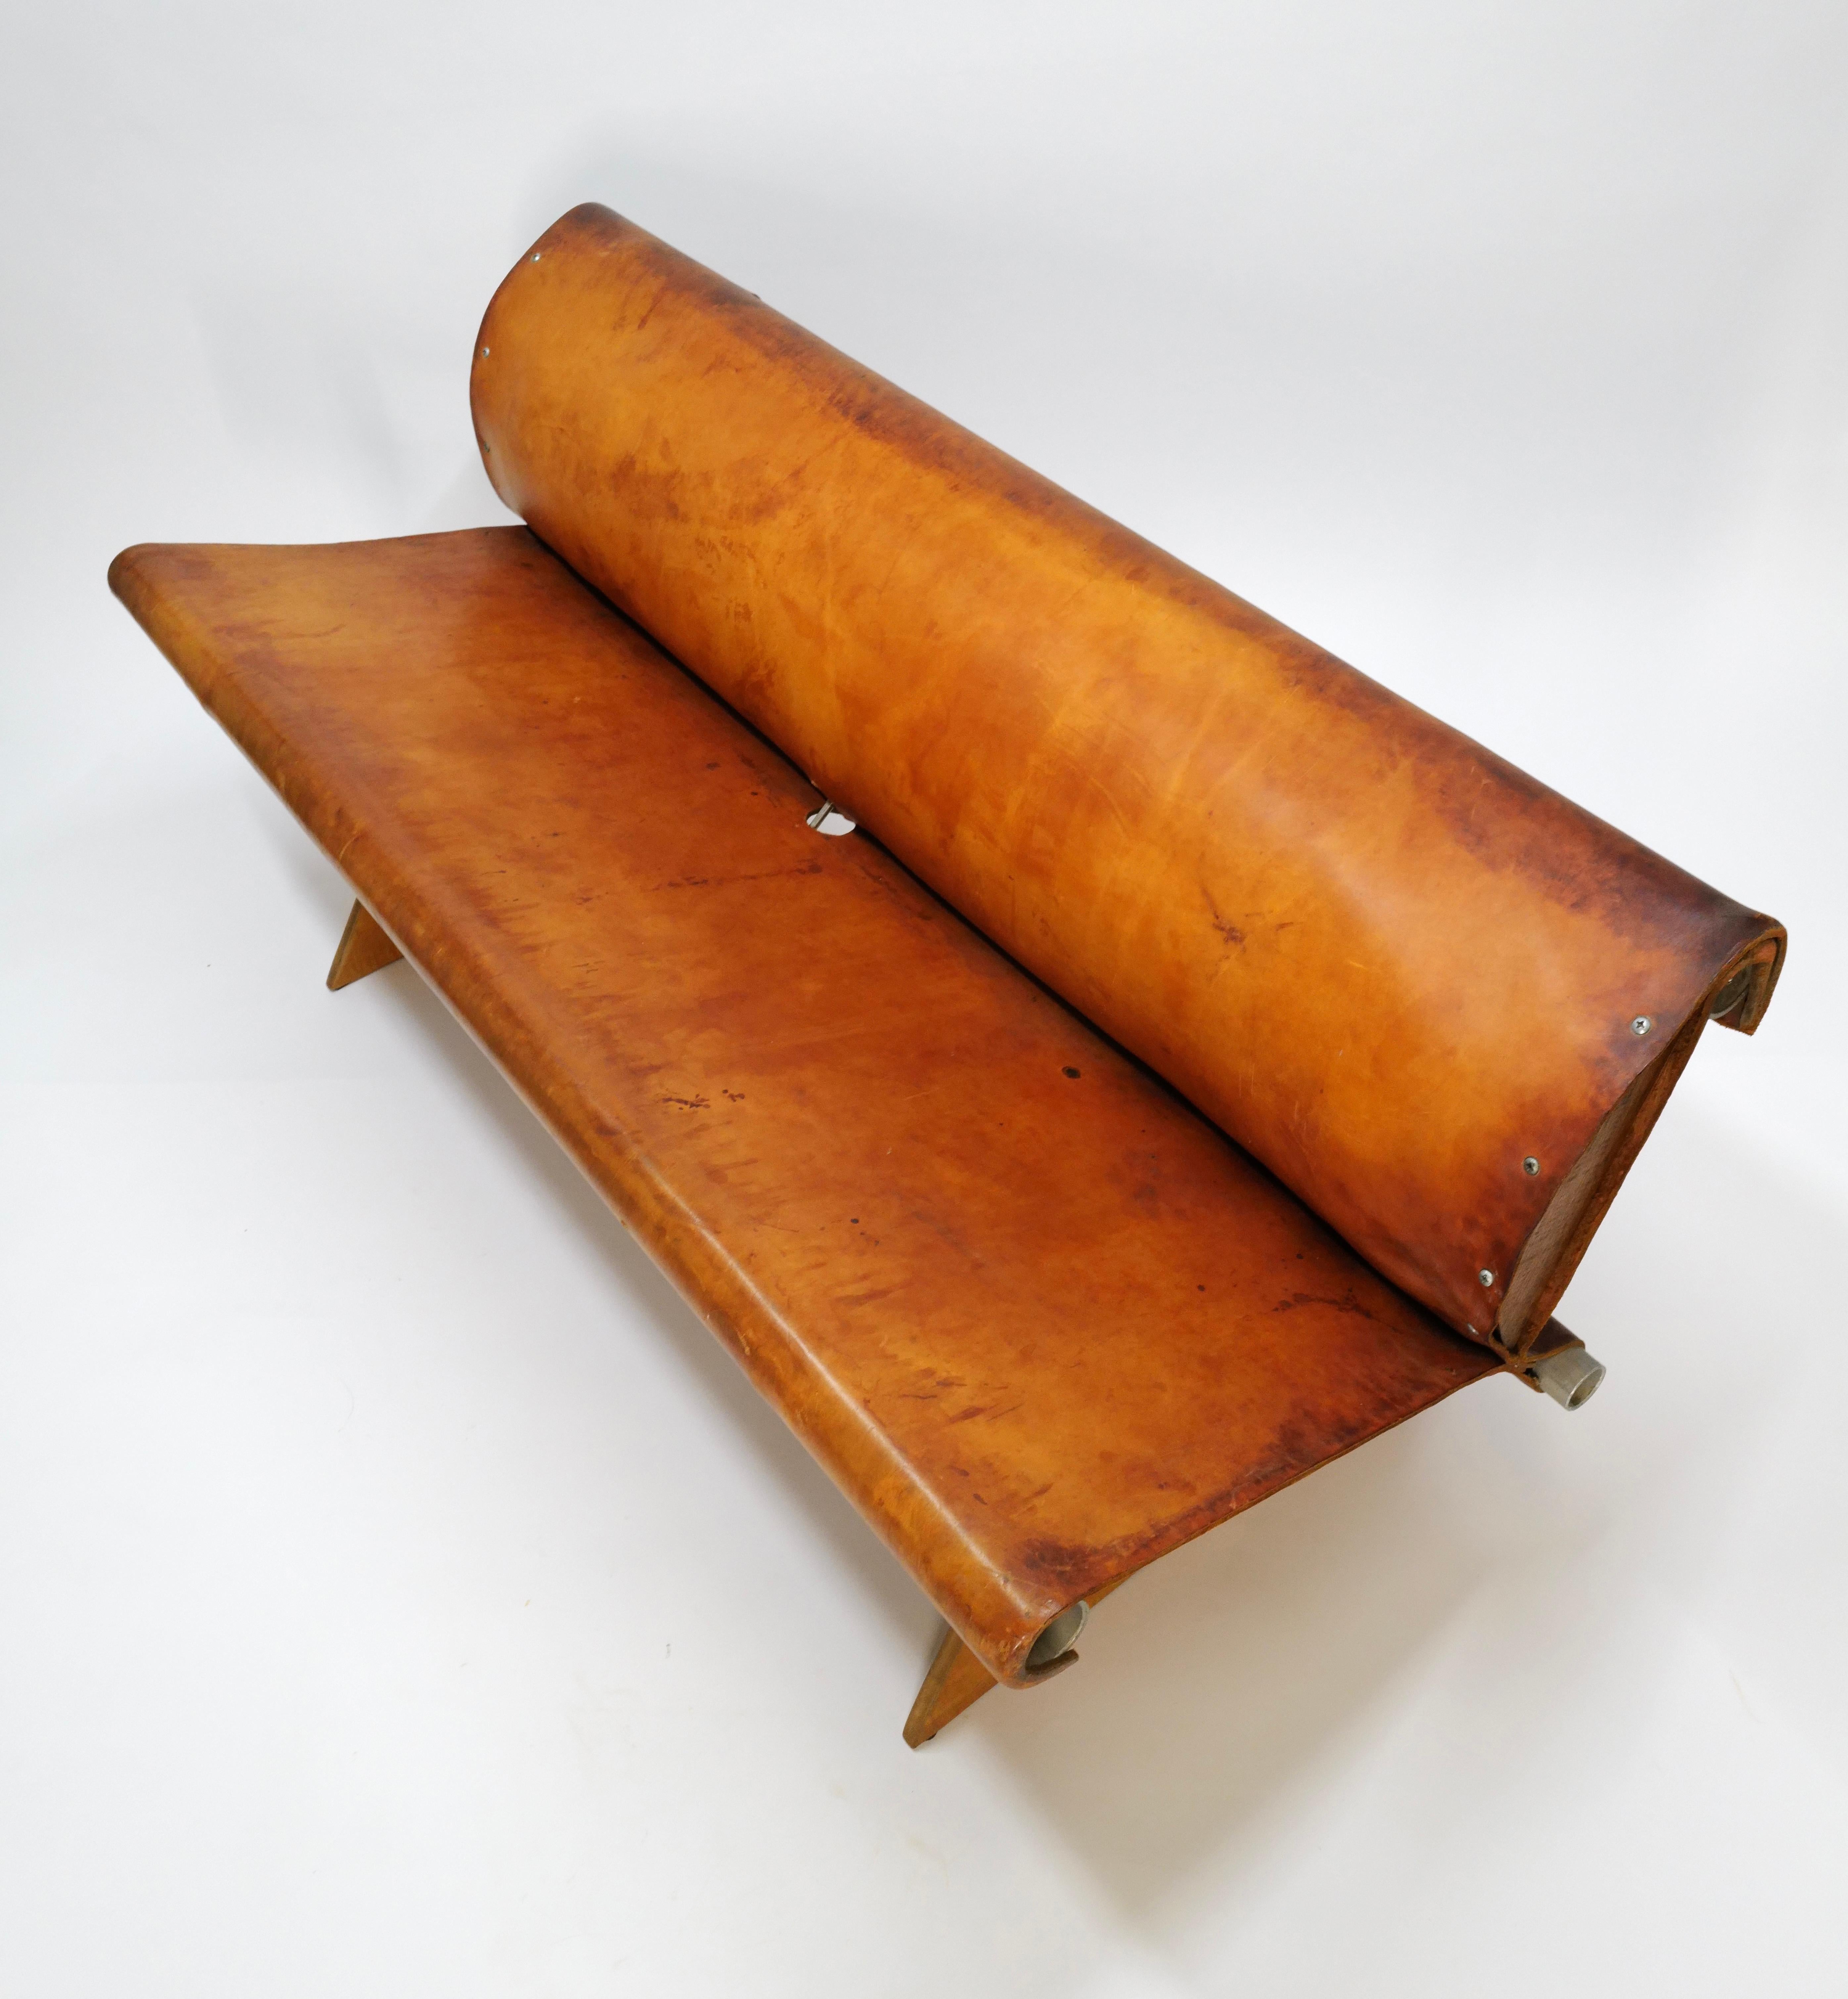 Rare Prototype Leather Bench by Max Gottschalk In Good Condition For Sale In Oklahoma City, OK